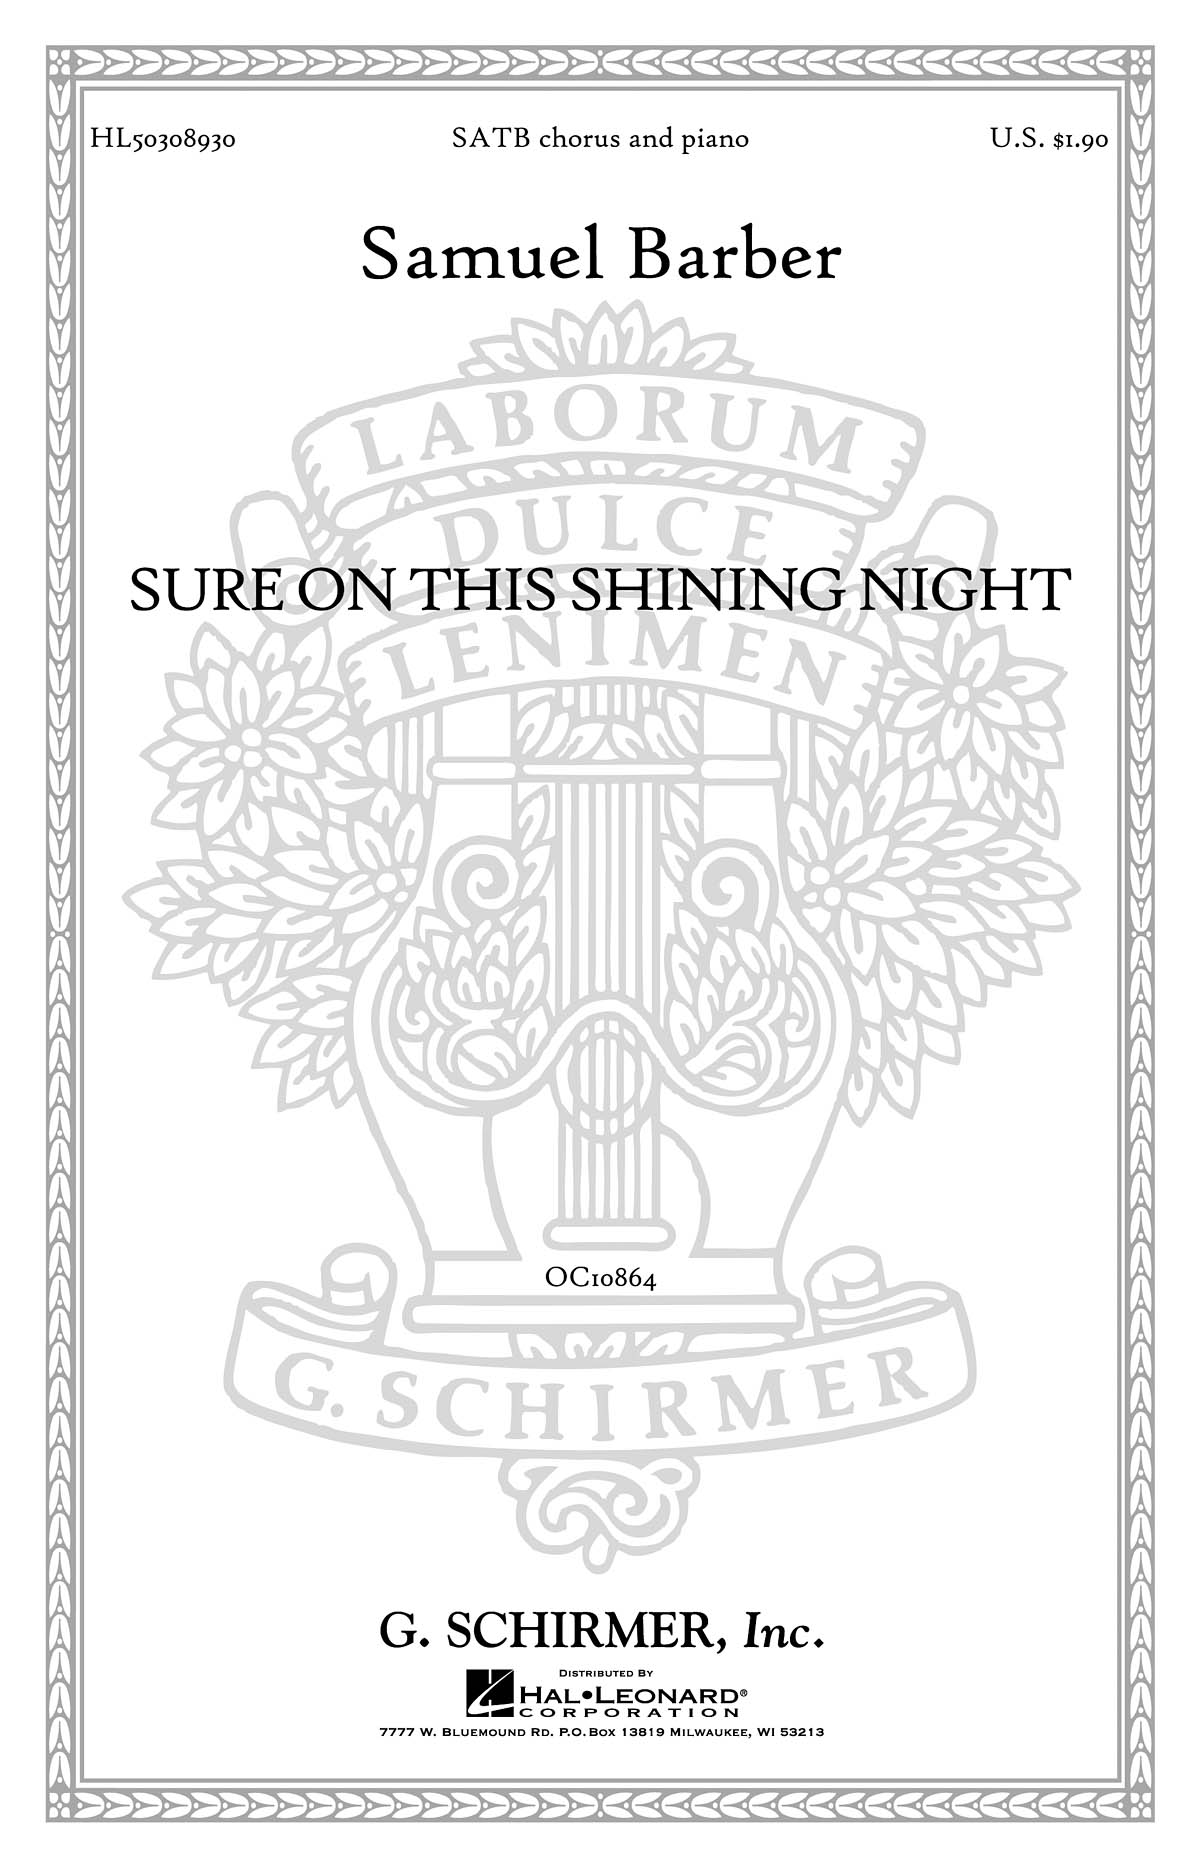 Samuel Barber: Sure on this shining night  Op. 13  No. 3: SATB: Vocal Score